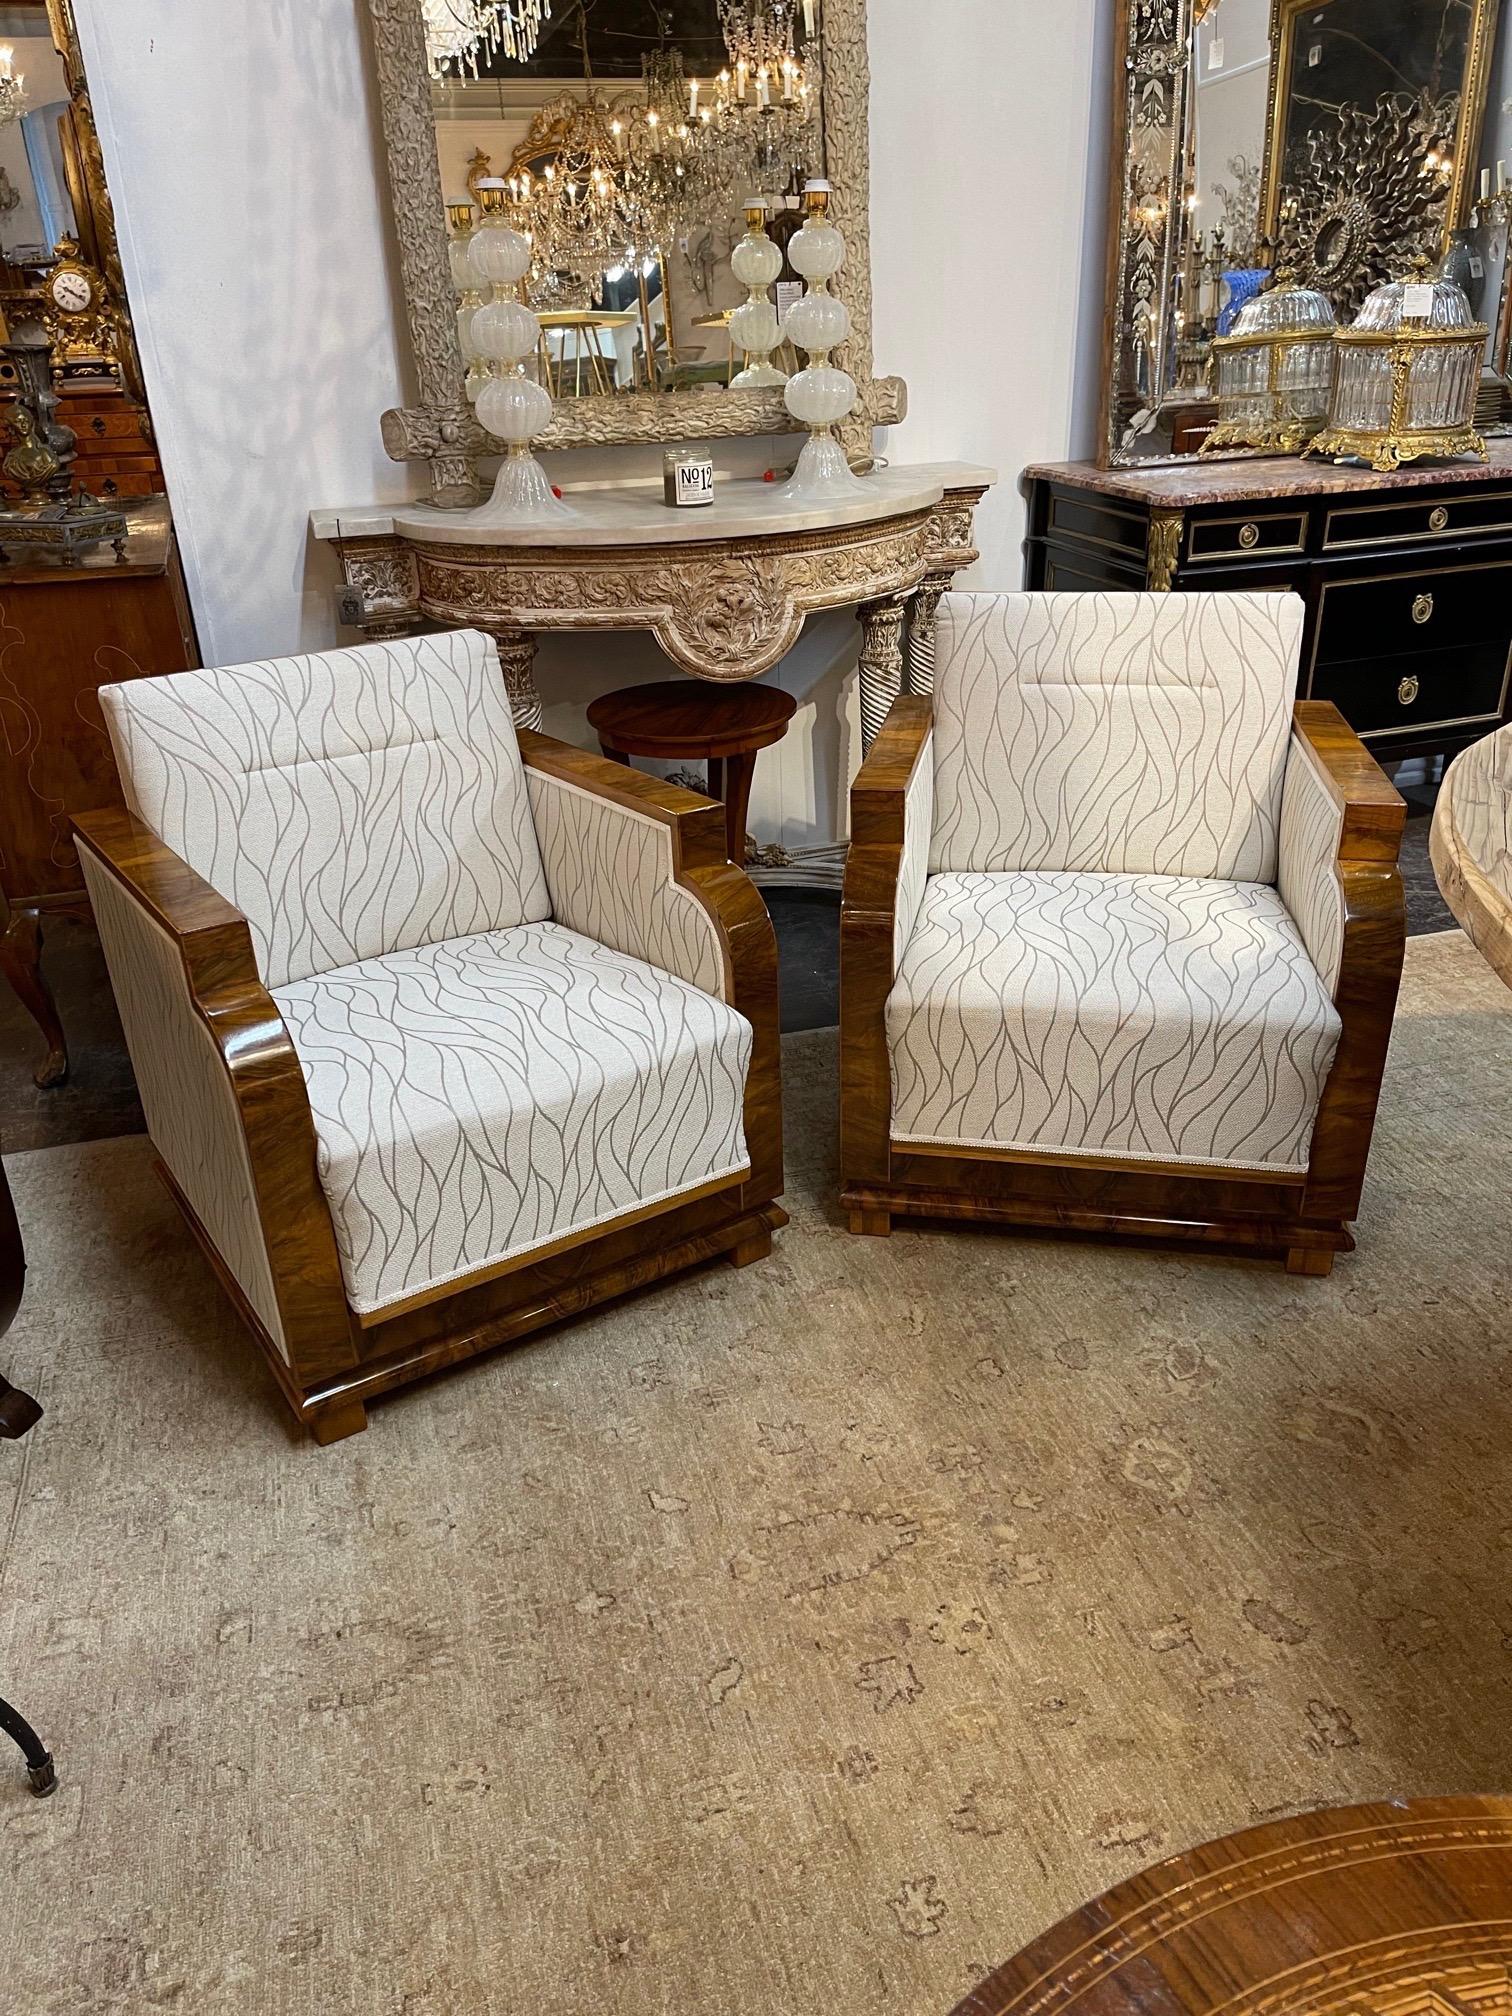 Beautiful French Art Deco style walnut armchairs. Upholstered in a pretty grey and white fabric and the finish on the wood is exceptional. Very nice! Note price listed is per item.